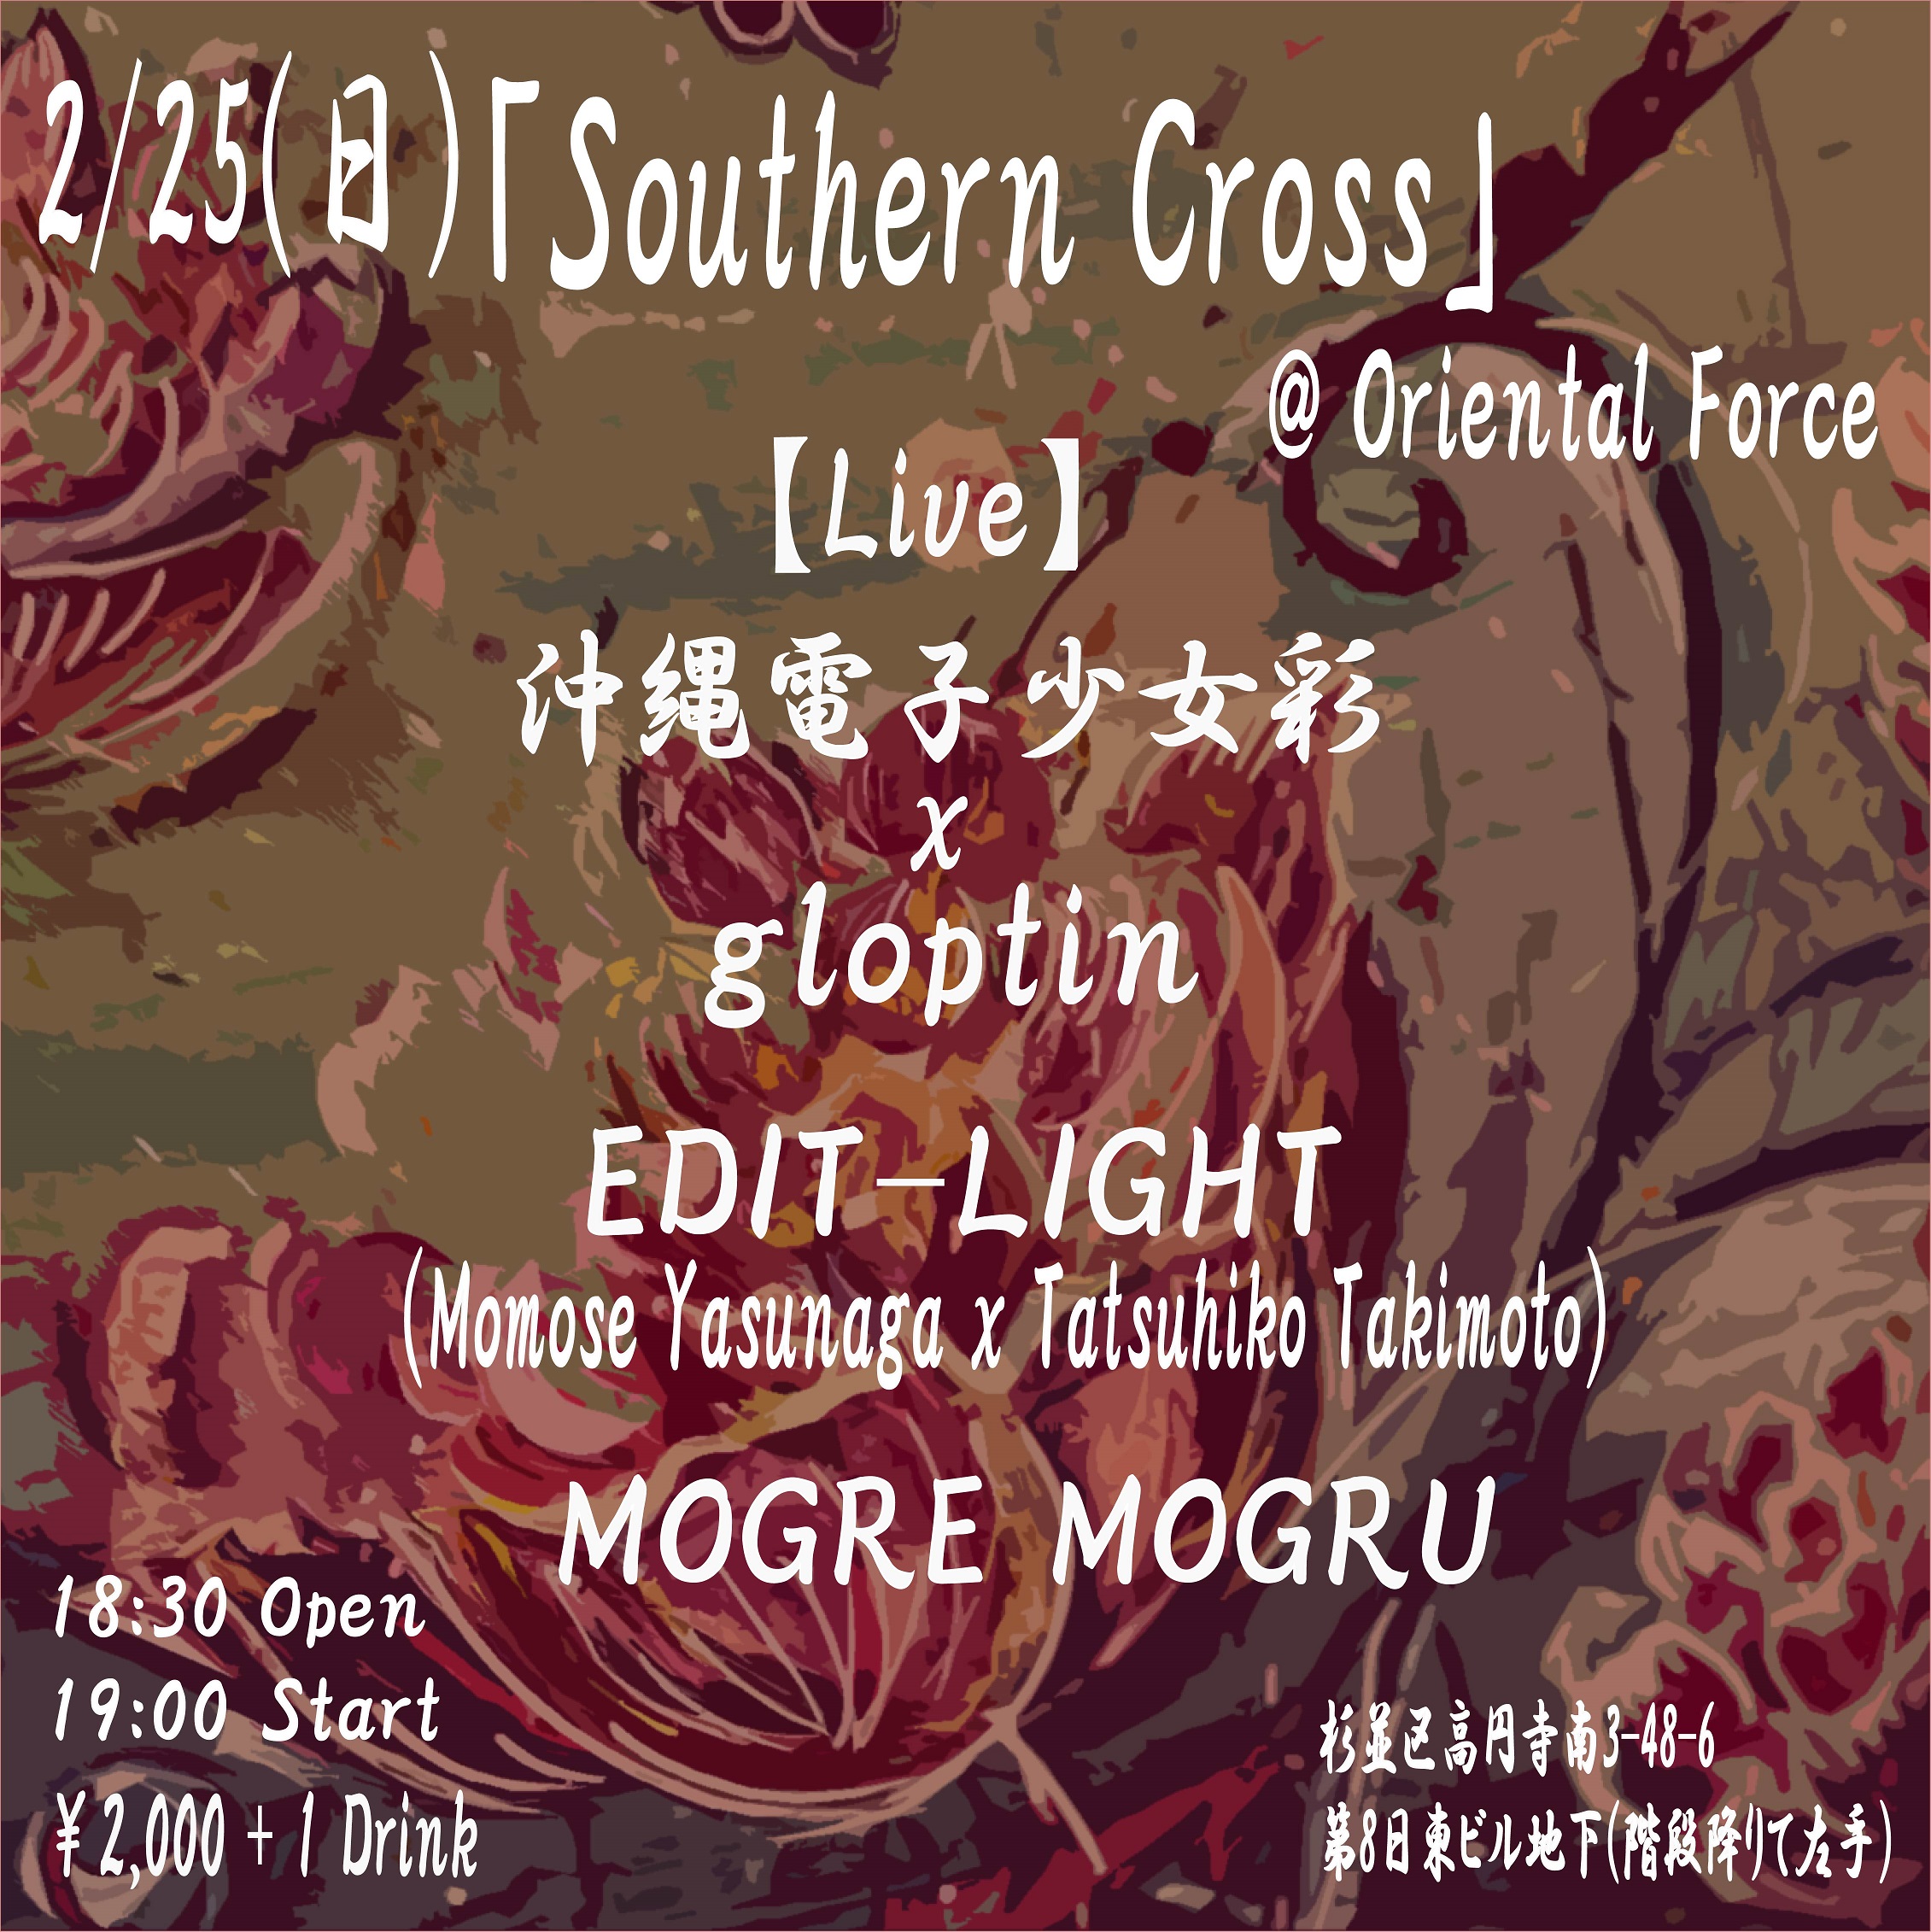 『Southern Cross』Presented by 剛田武 & Oriental Force